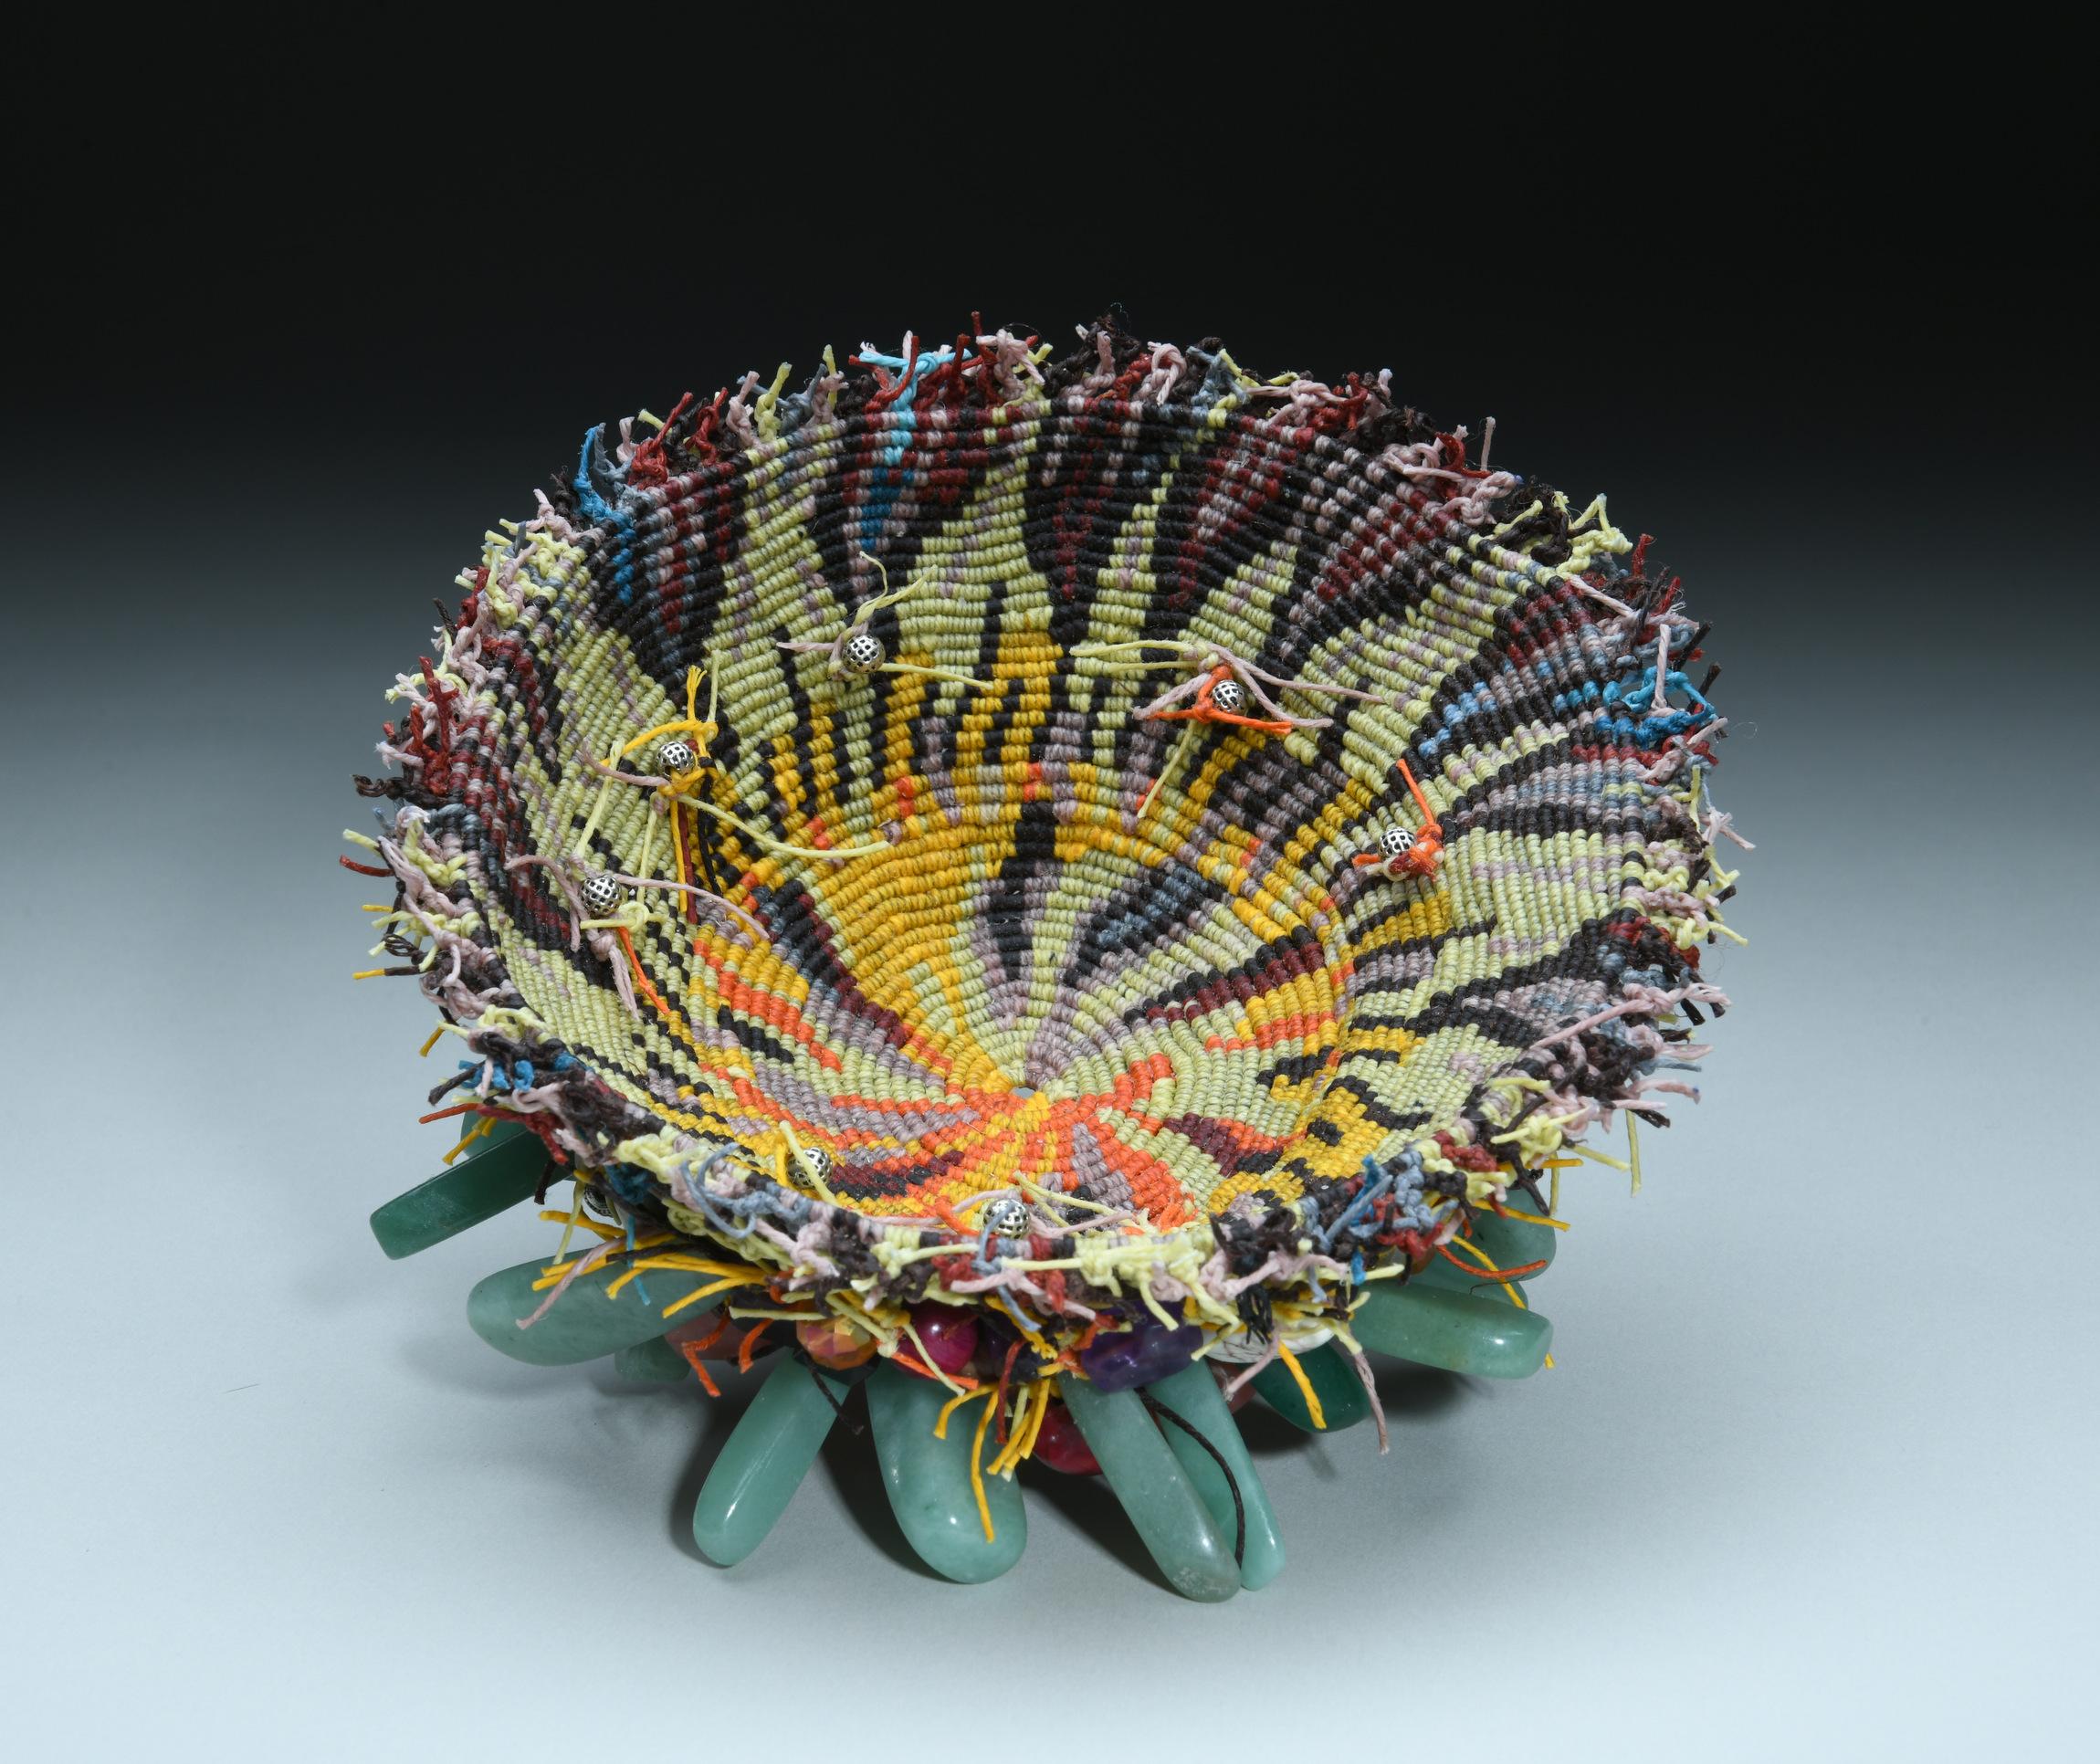 Sun Smith-Forêt Abstract Sculpture – "Bowl with Jade Bottom", Contemporary Mixed Media Textile Sculpture with Stones